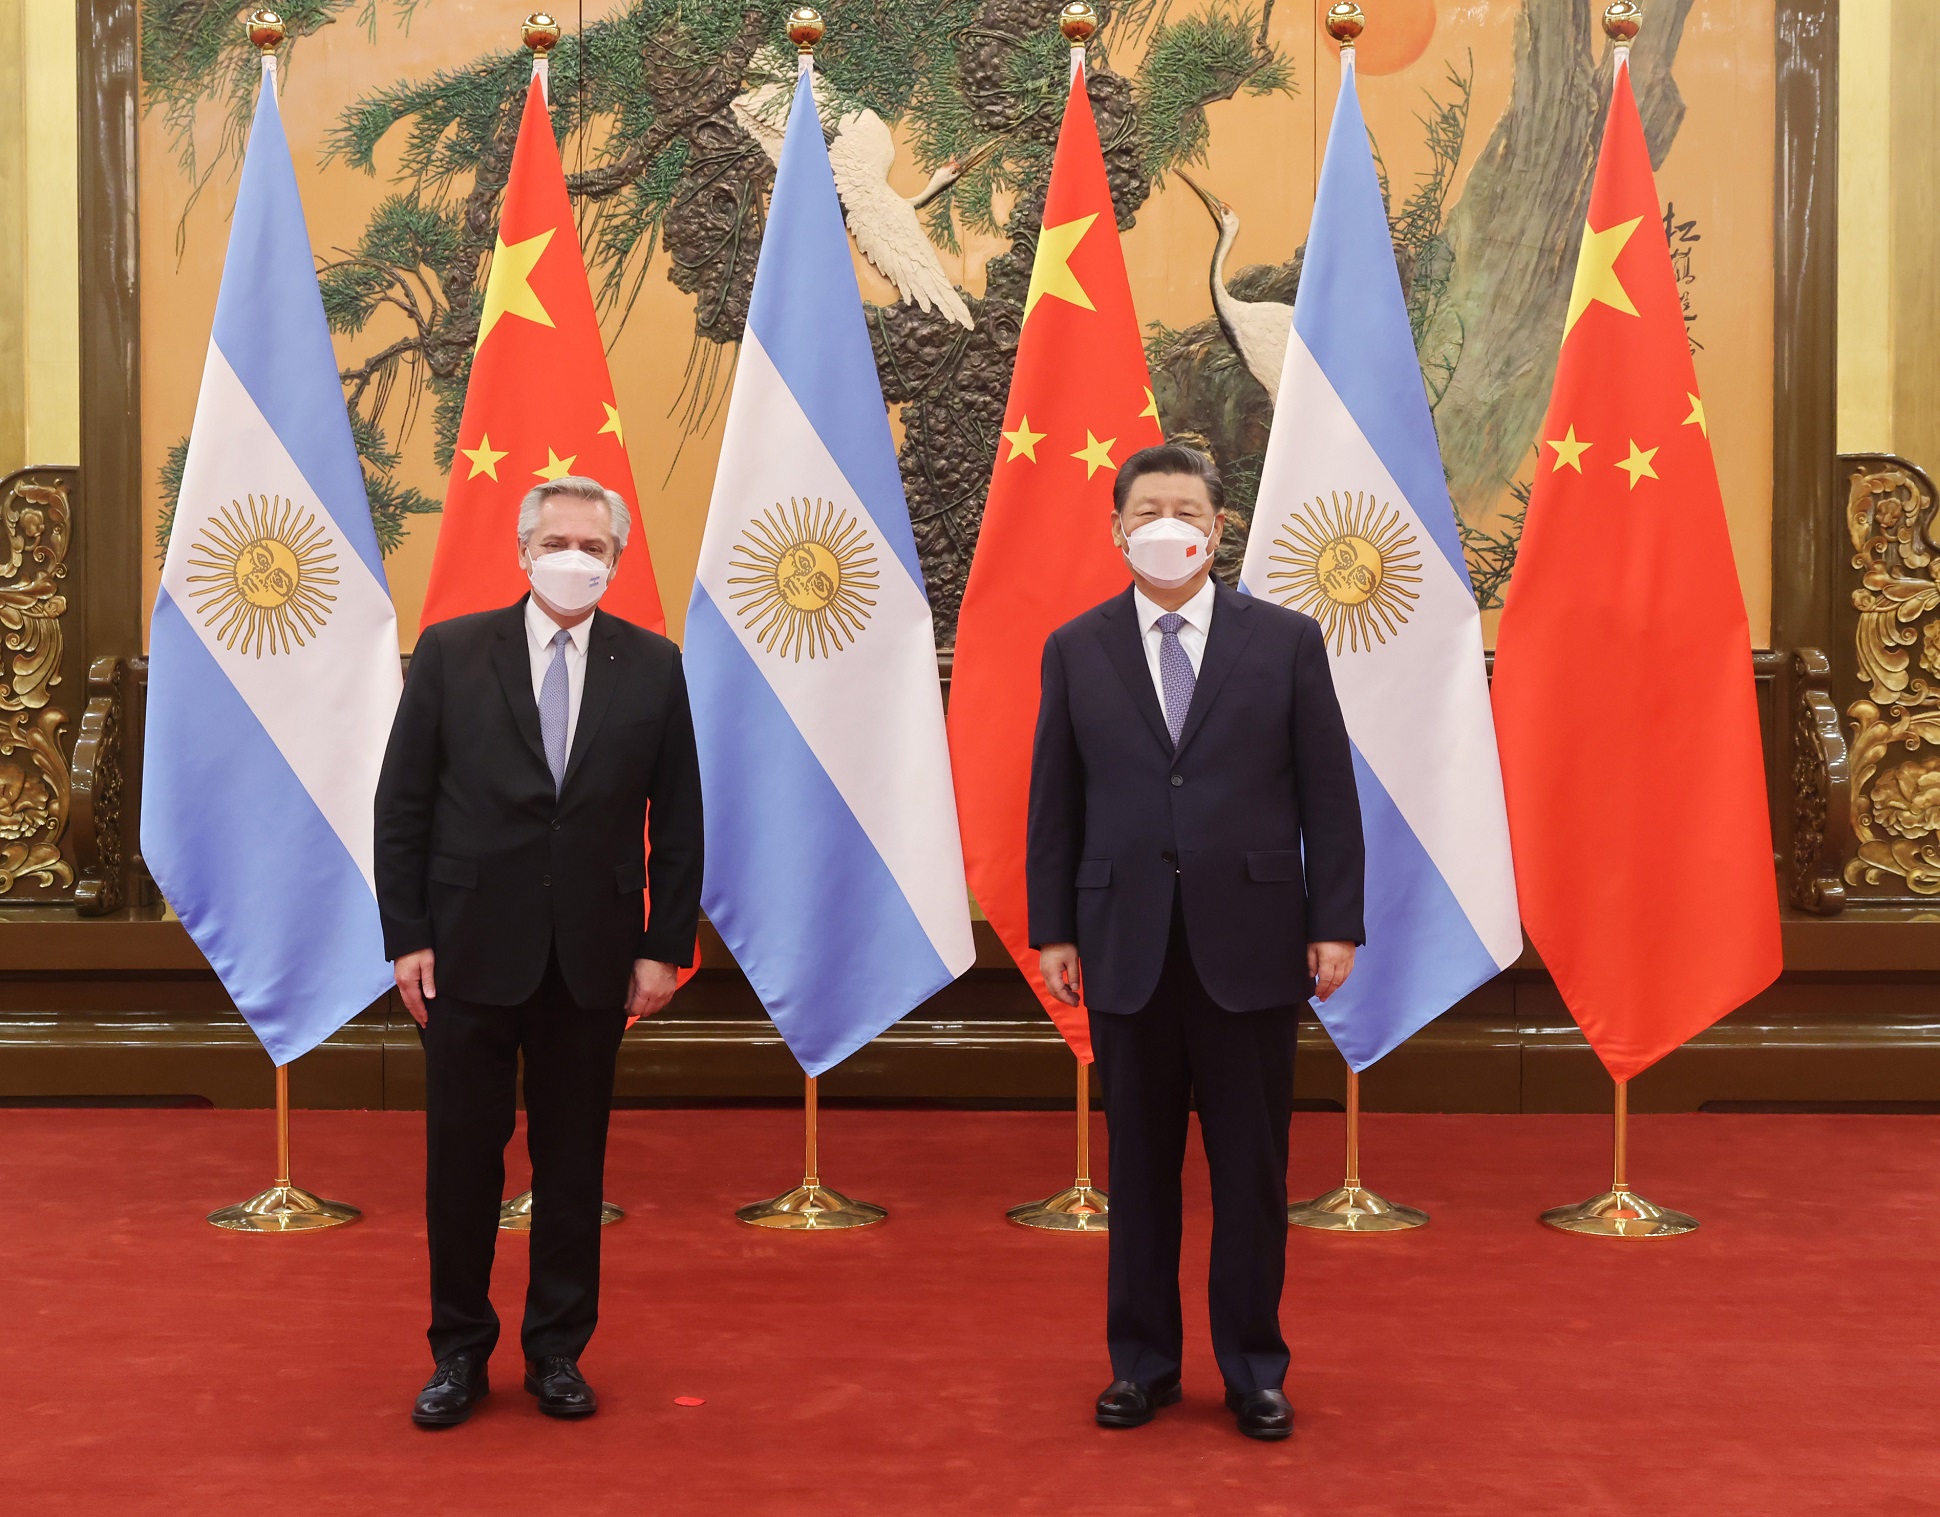 <p>President Alberto Fernández of Argentina meets China&#8217;s Xi Jinping in Beijing on 6 February. Relations between the two countries look set to strengthen, as Argentina becomes the latest Latin American country, and the region&#8217;s largest economy, to join the Belt and Road Initiative. (Image: Casa Rosada / <a href="https://creativecommons.org/licenses/by/2.5/ar/deed.en">CC BY 2.5 AR</a>)</p>